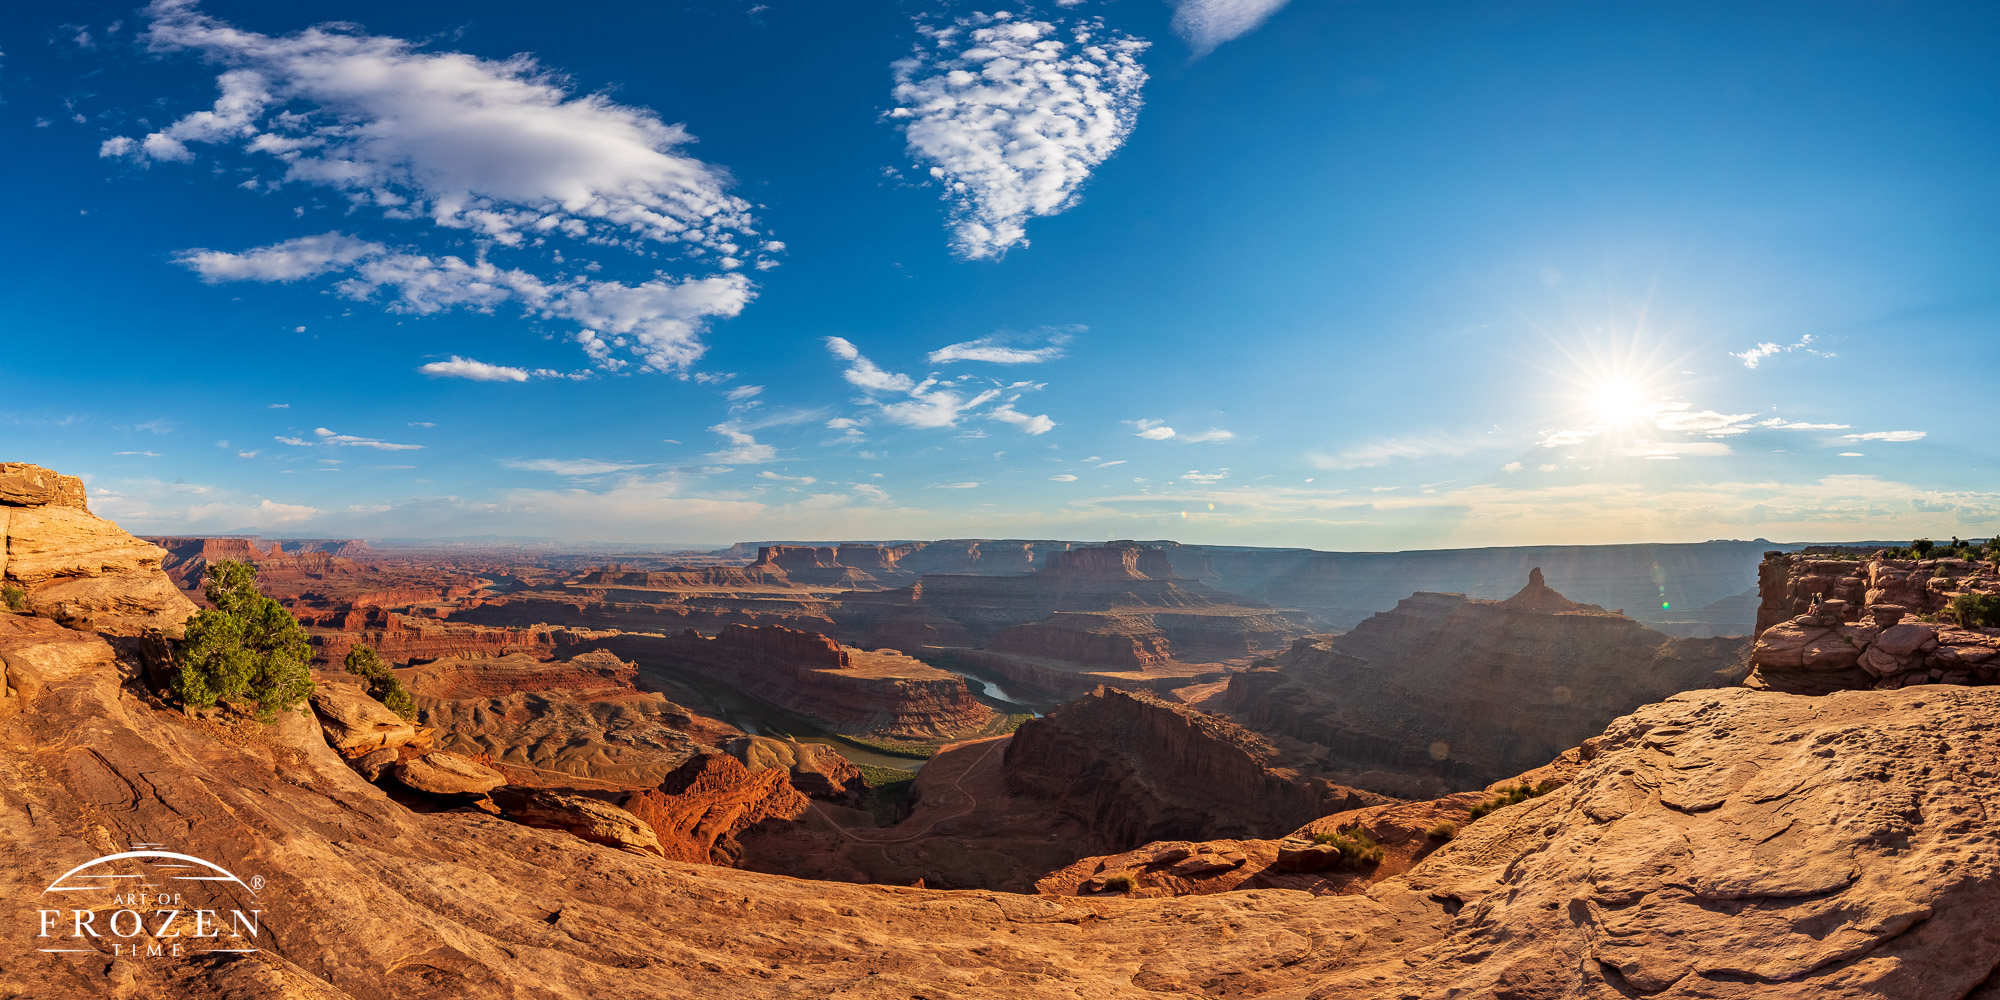 An evening view from Dead Horse Point, near Moab Utah were the golden evening light rakes across the Jurassic sedimentary layers revealed by the Colorado River